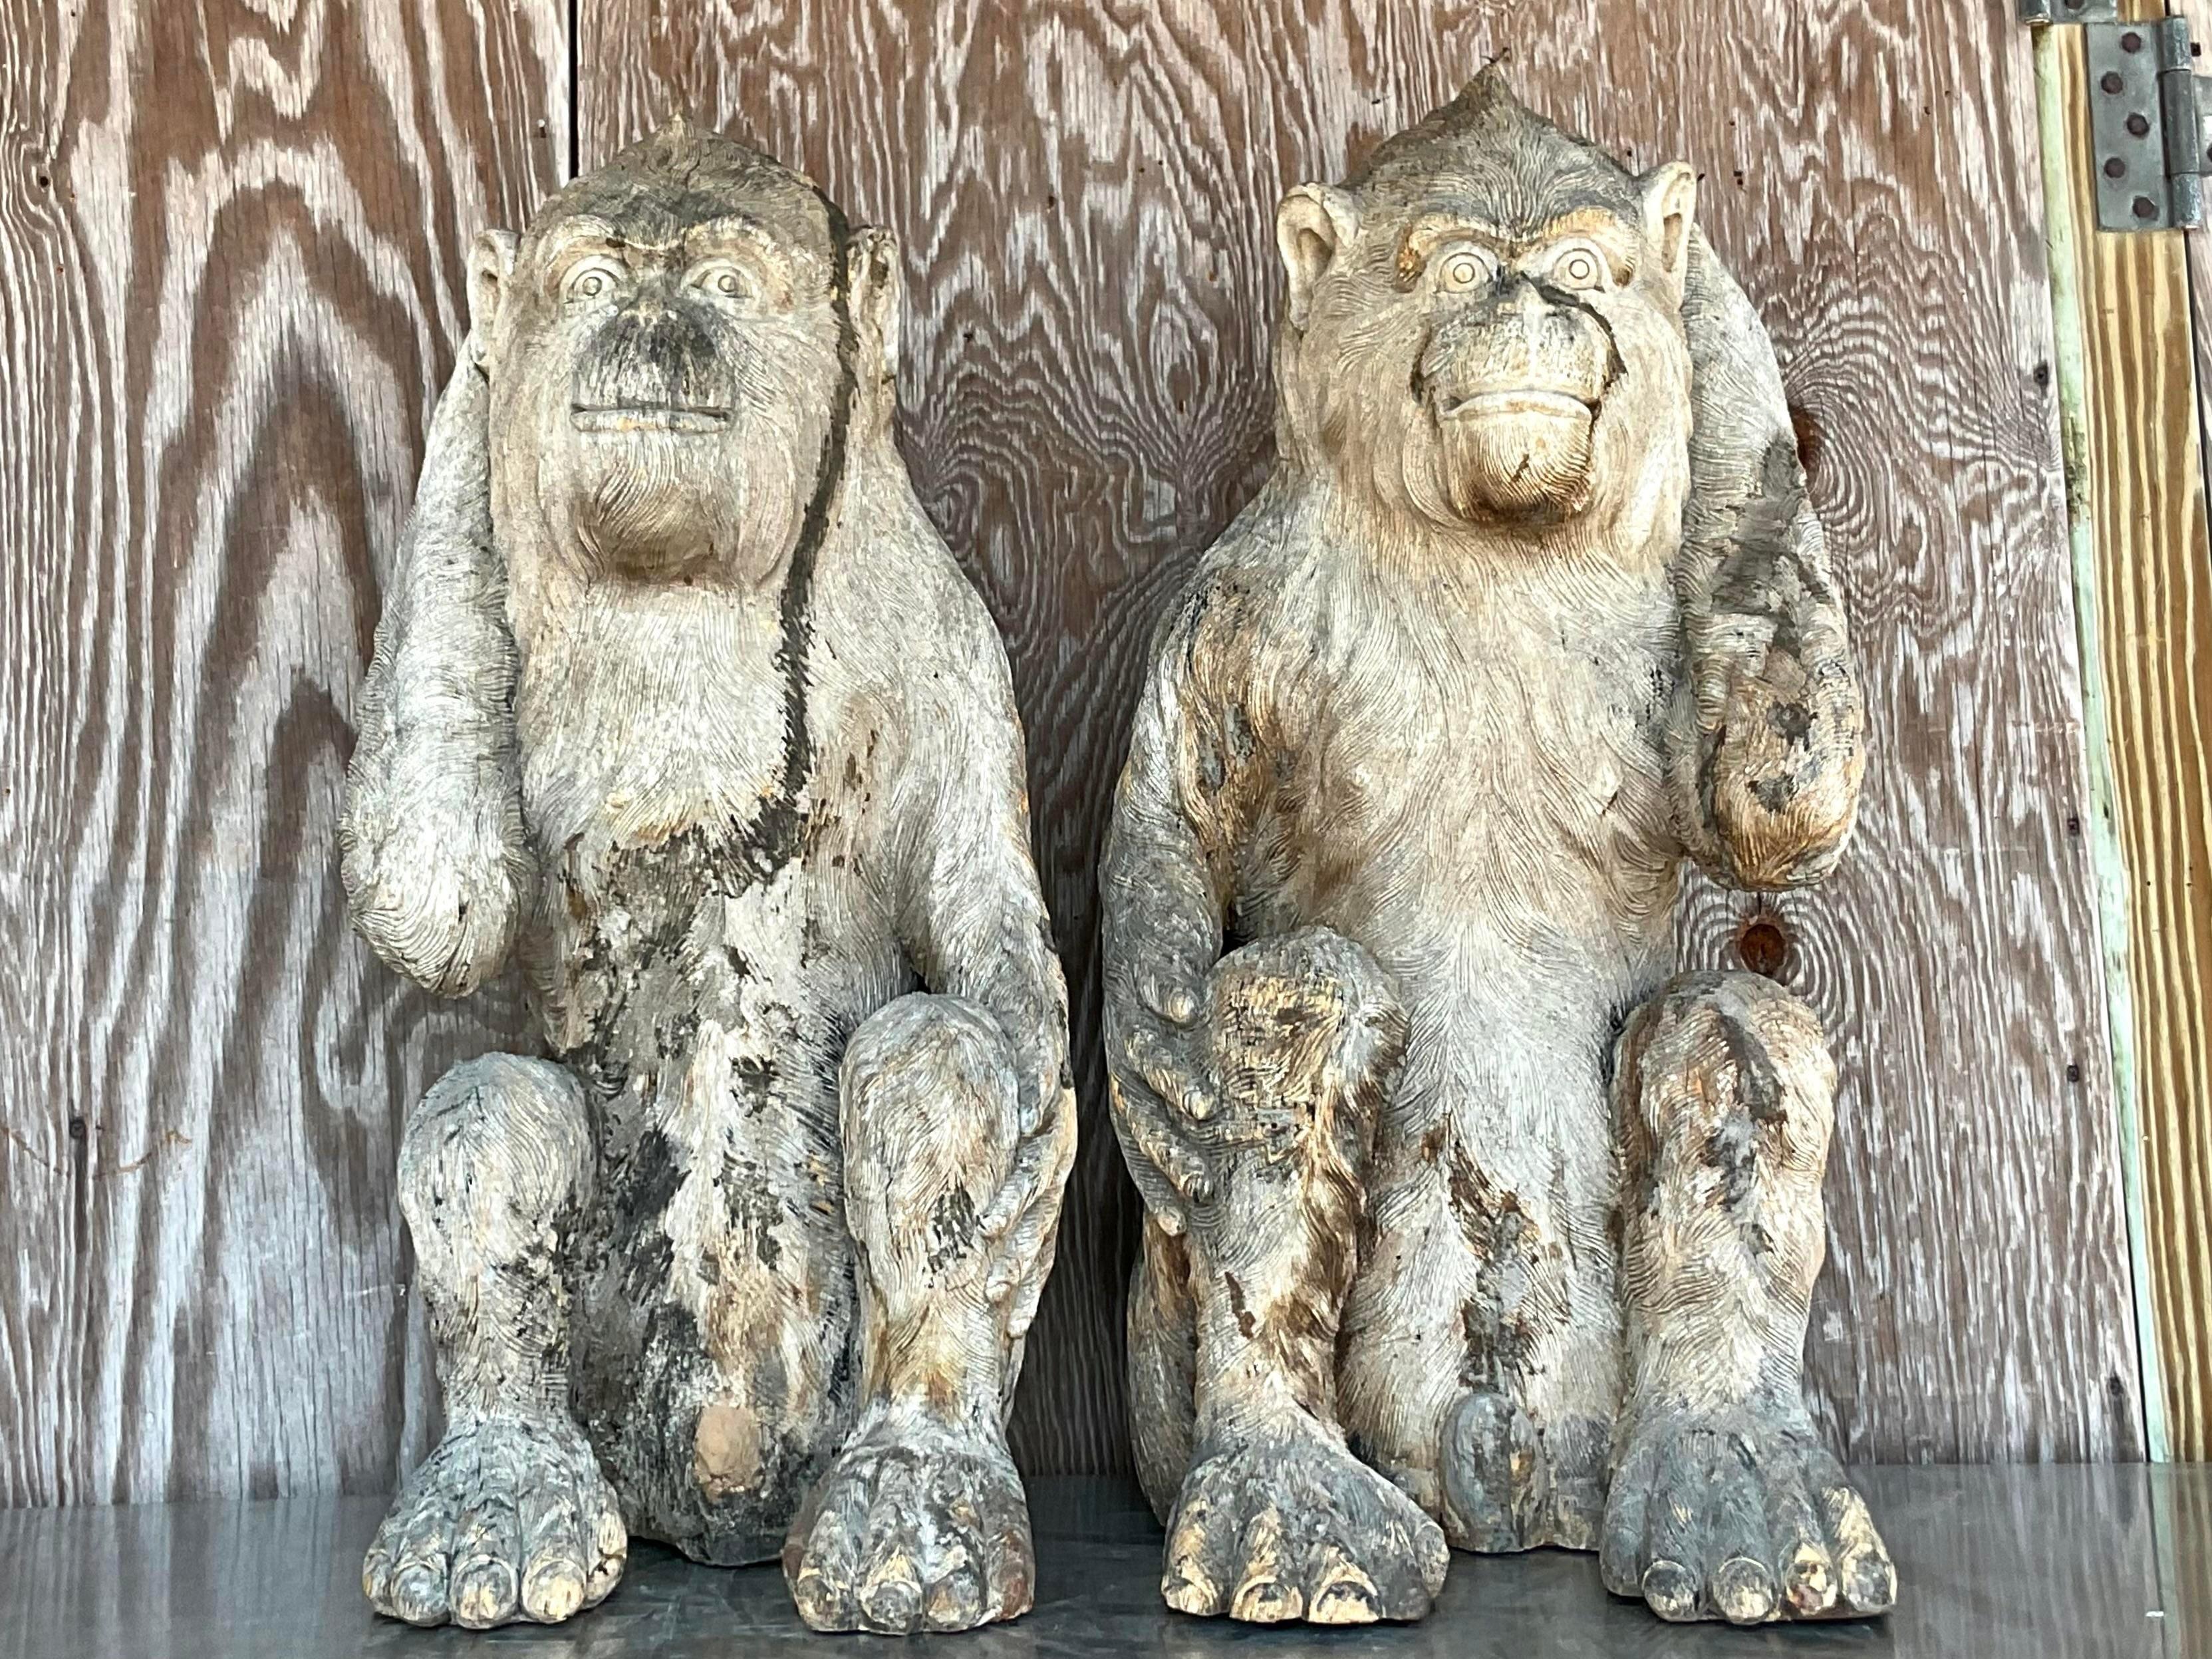 A fabulous pair of monumental wooden carved monkeys. Beautiful detail work with loads of great patina from time. A charming pair sure to add a flash of fun to any space. Acquired from a Palm Beach estate.